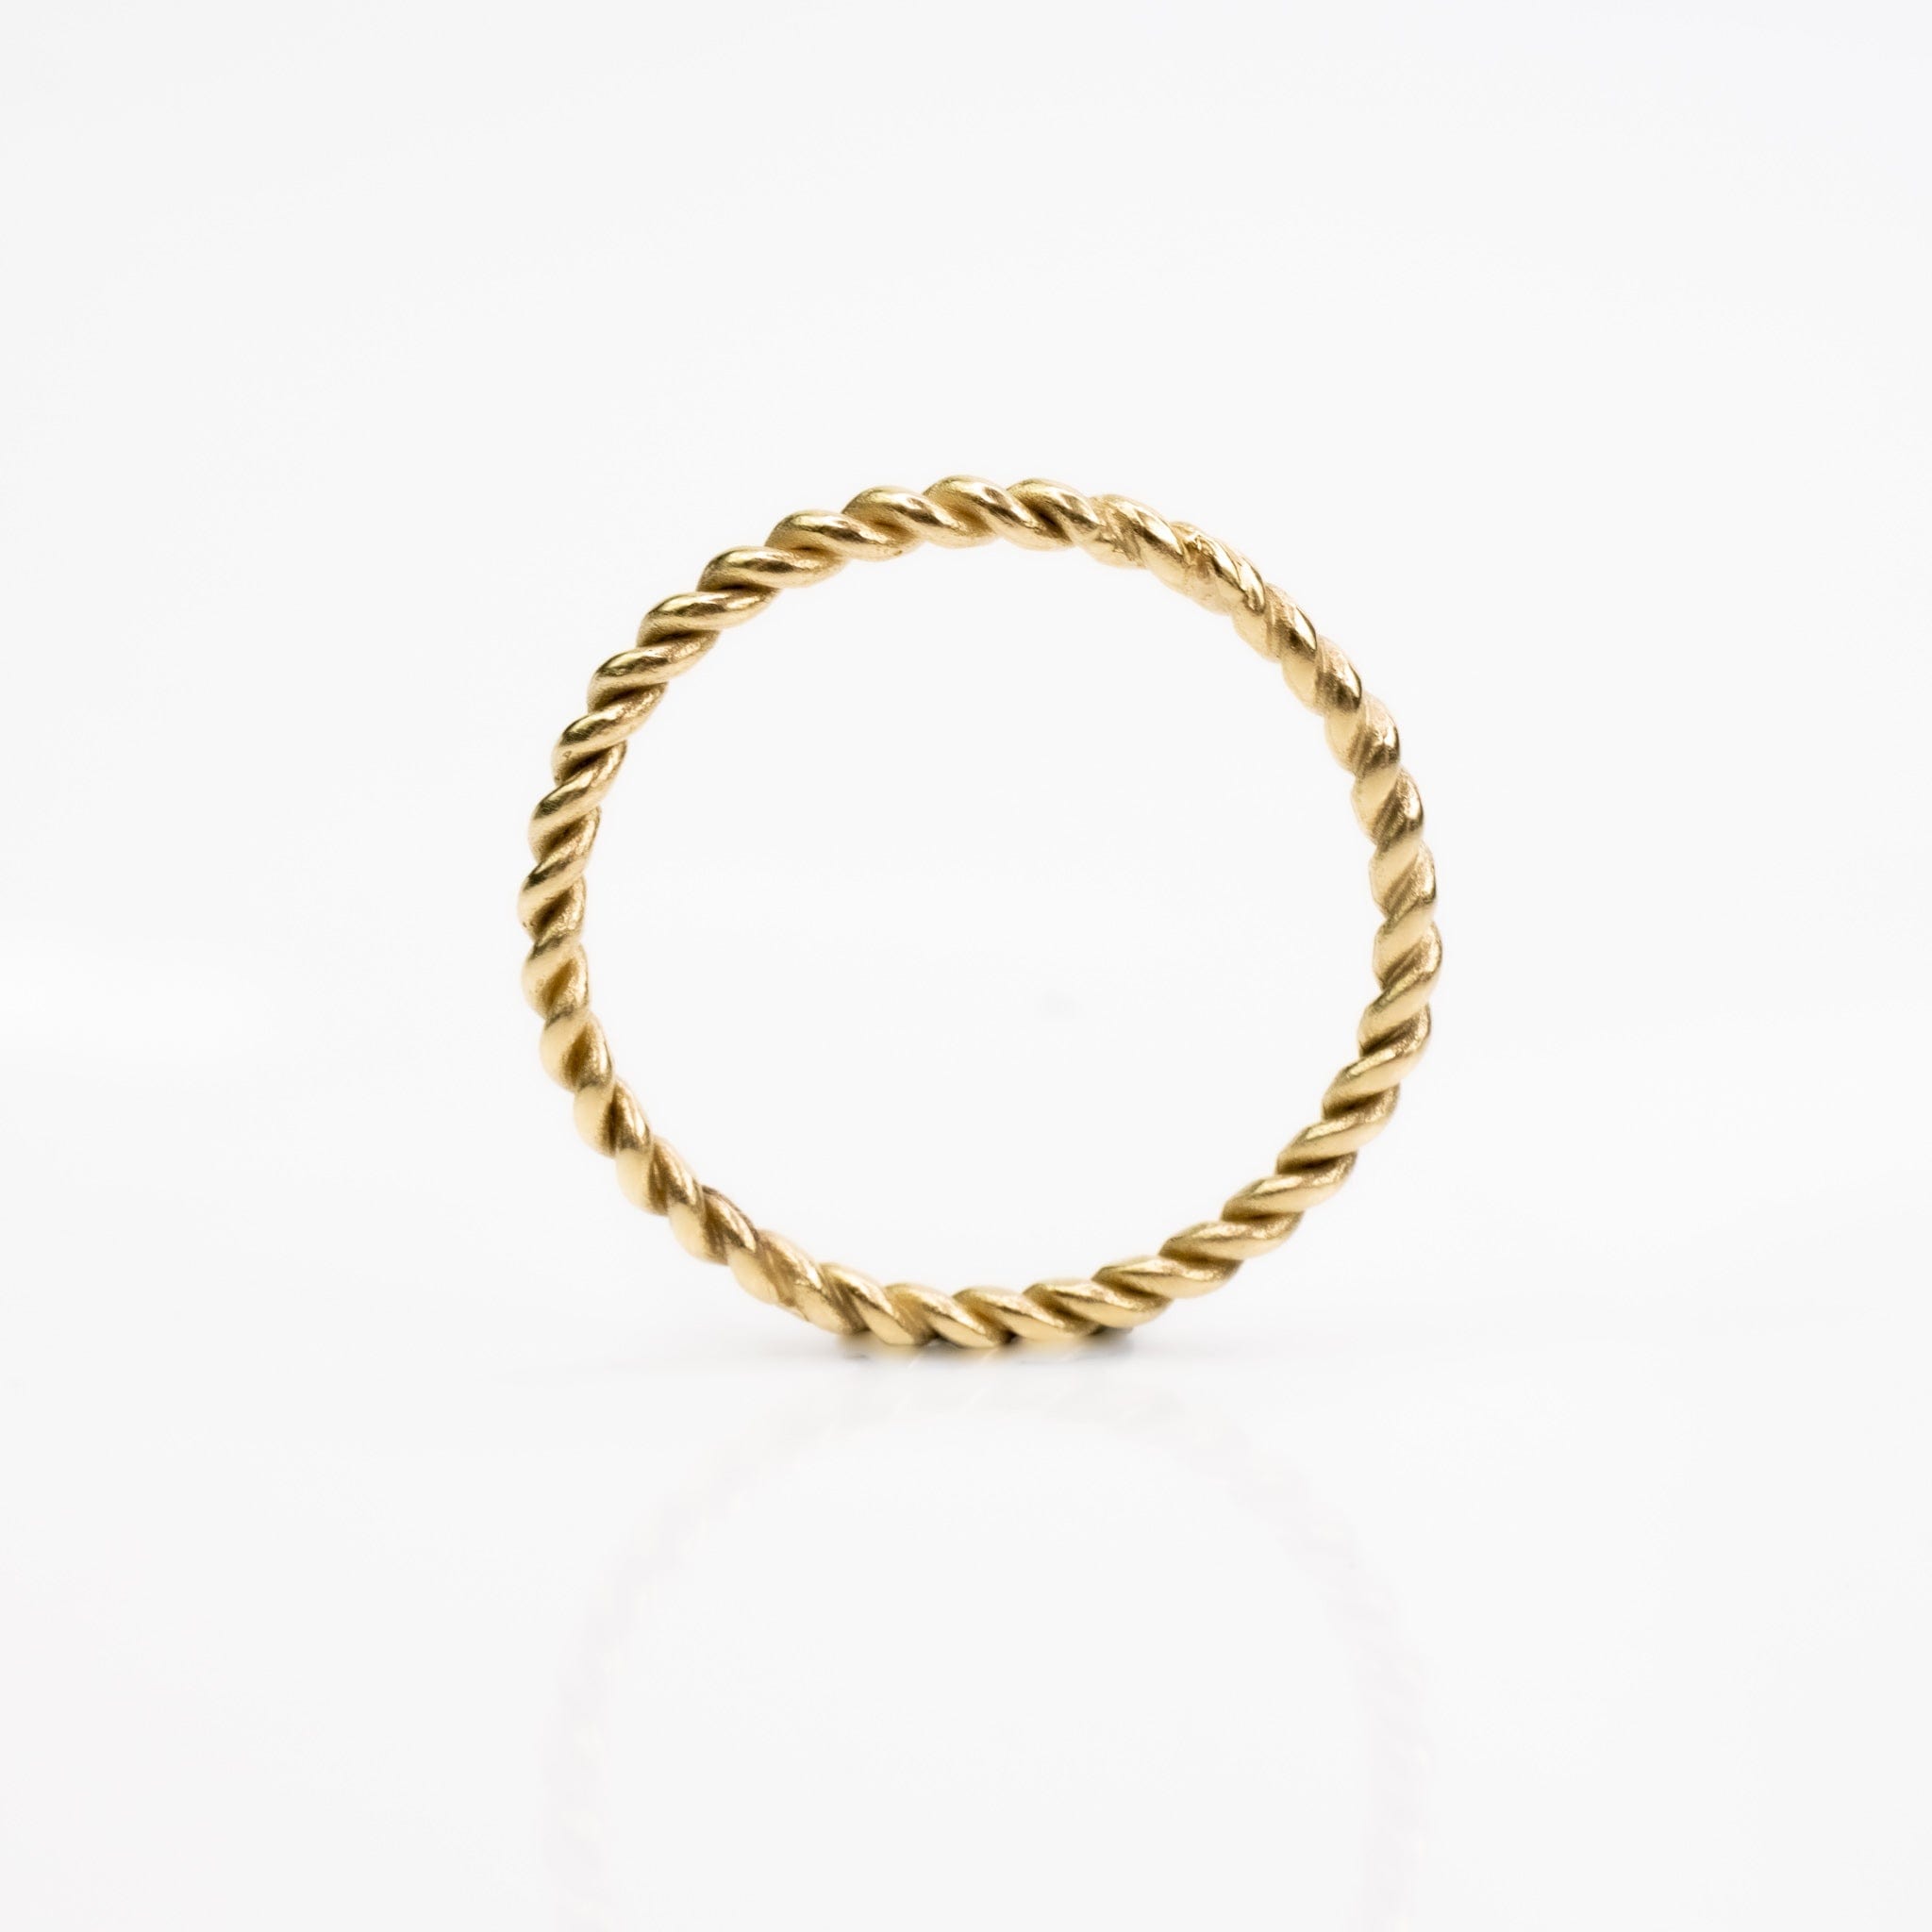 9ct Gold Twist Ring - Moments Jewellery